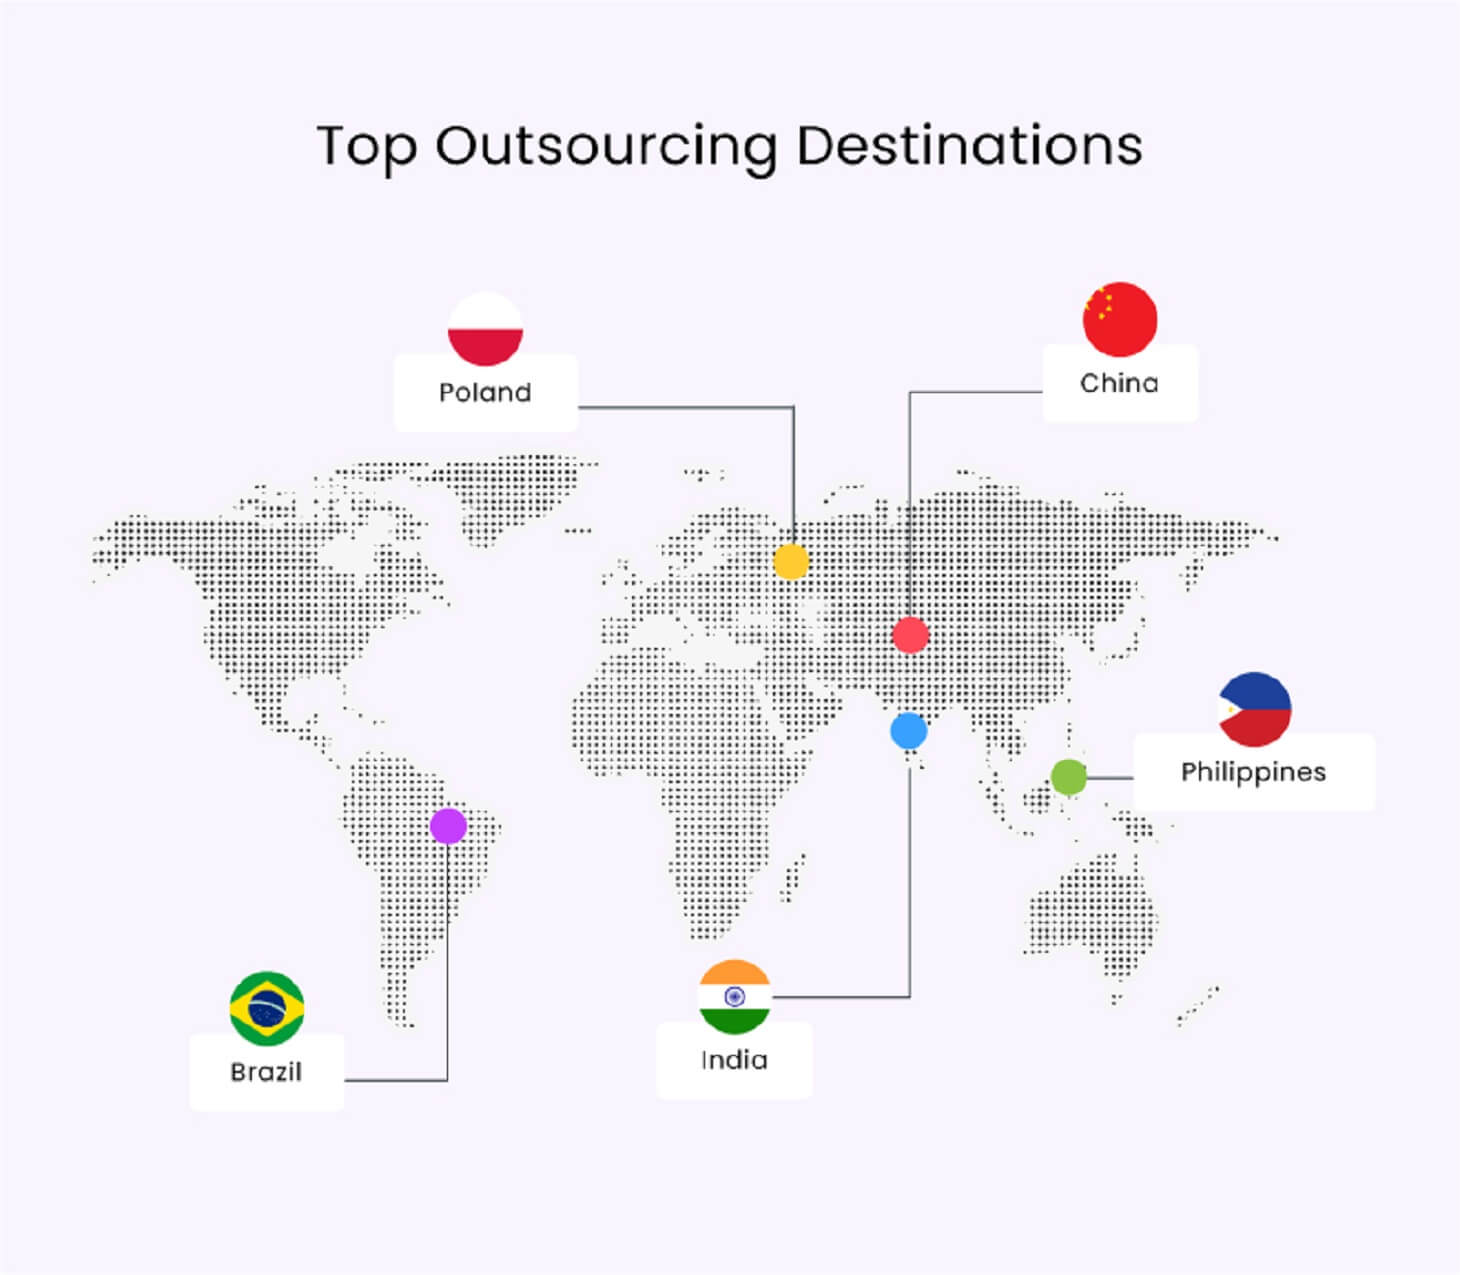 Top Outsourcing Destinations map